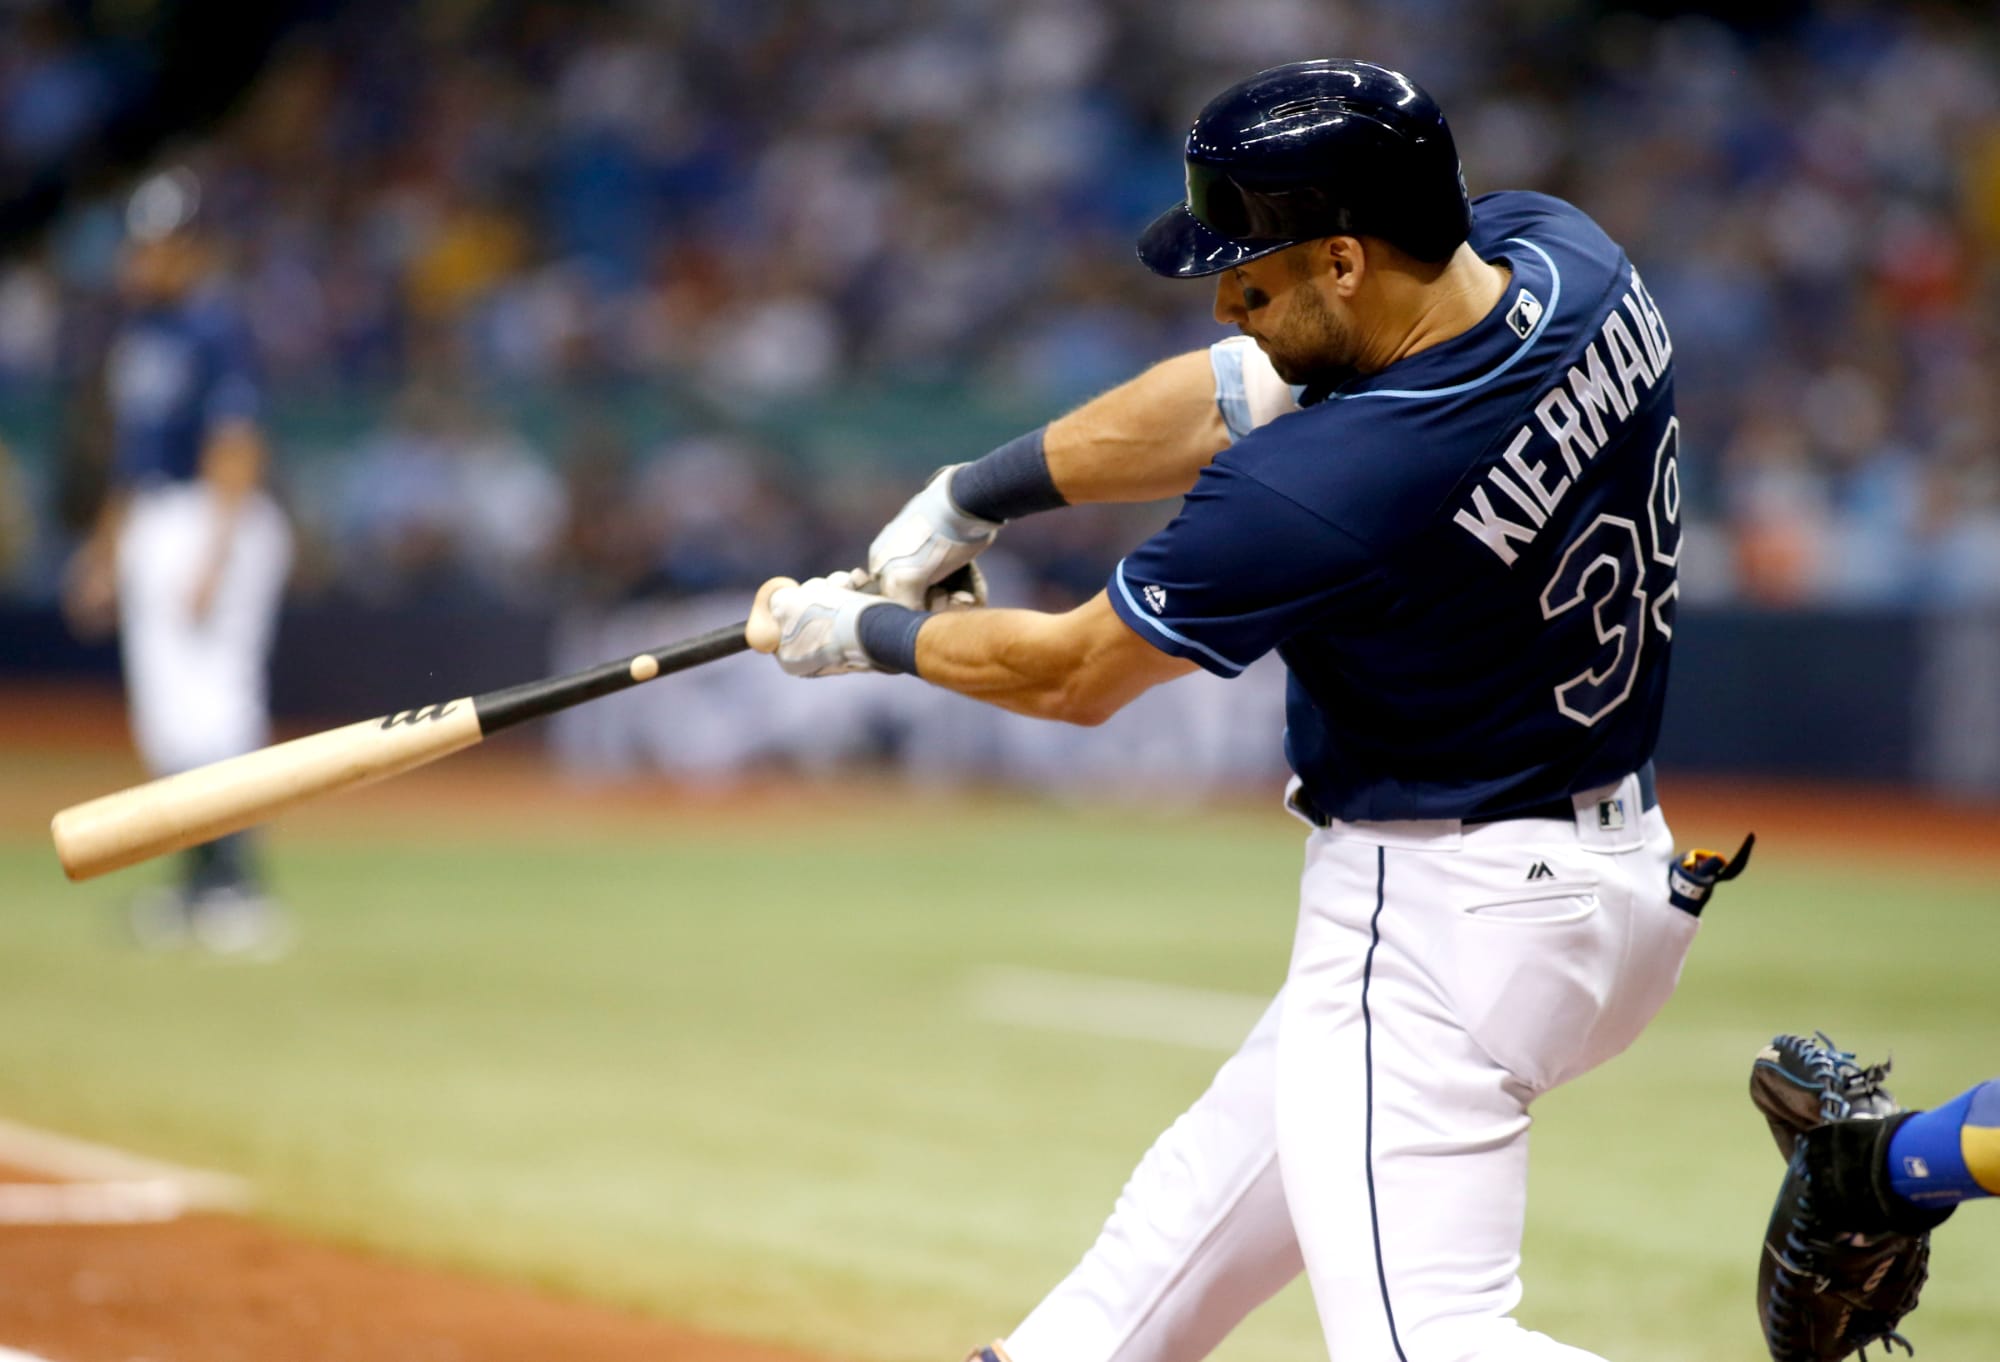 Tampa Bay Rays may have second best player in baseball